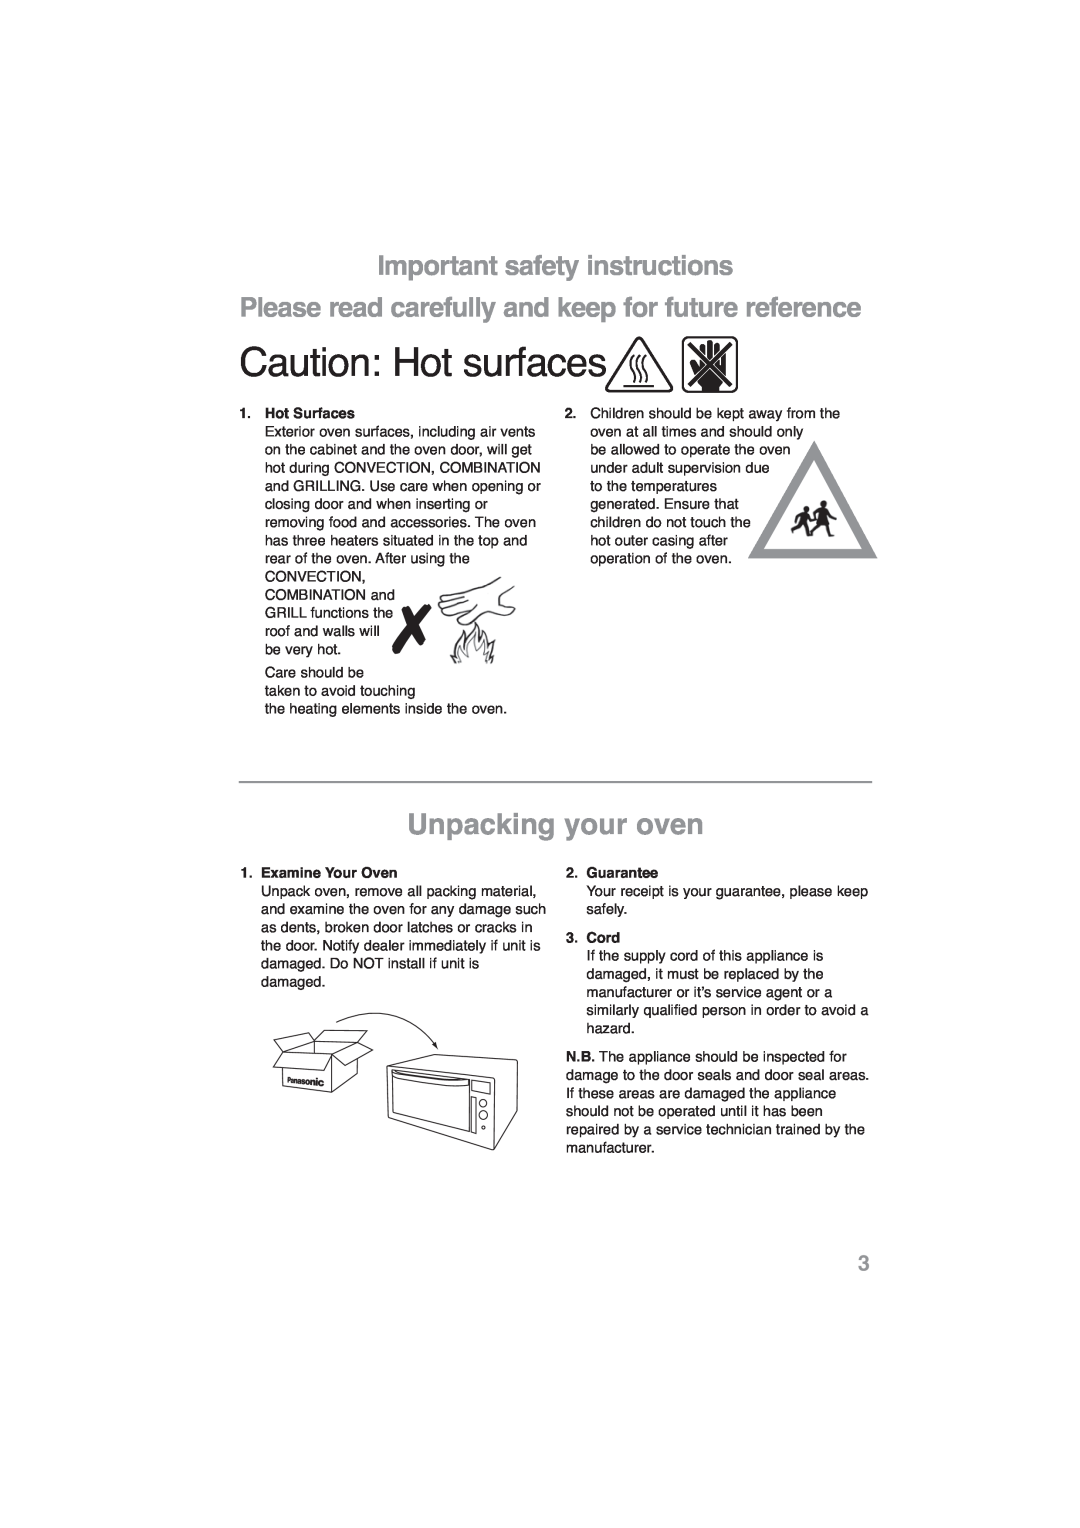 Panasonic NN-CF778S Unpacking your oven, Caution: Hot surfaces, Important safety instructions, Hot Surfaces, Guarantee 